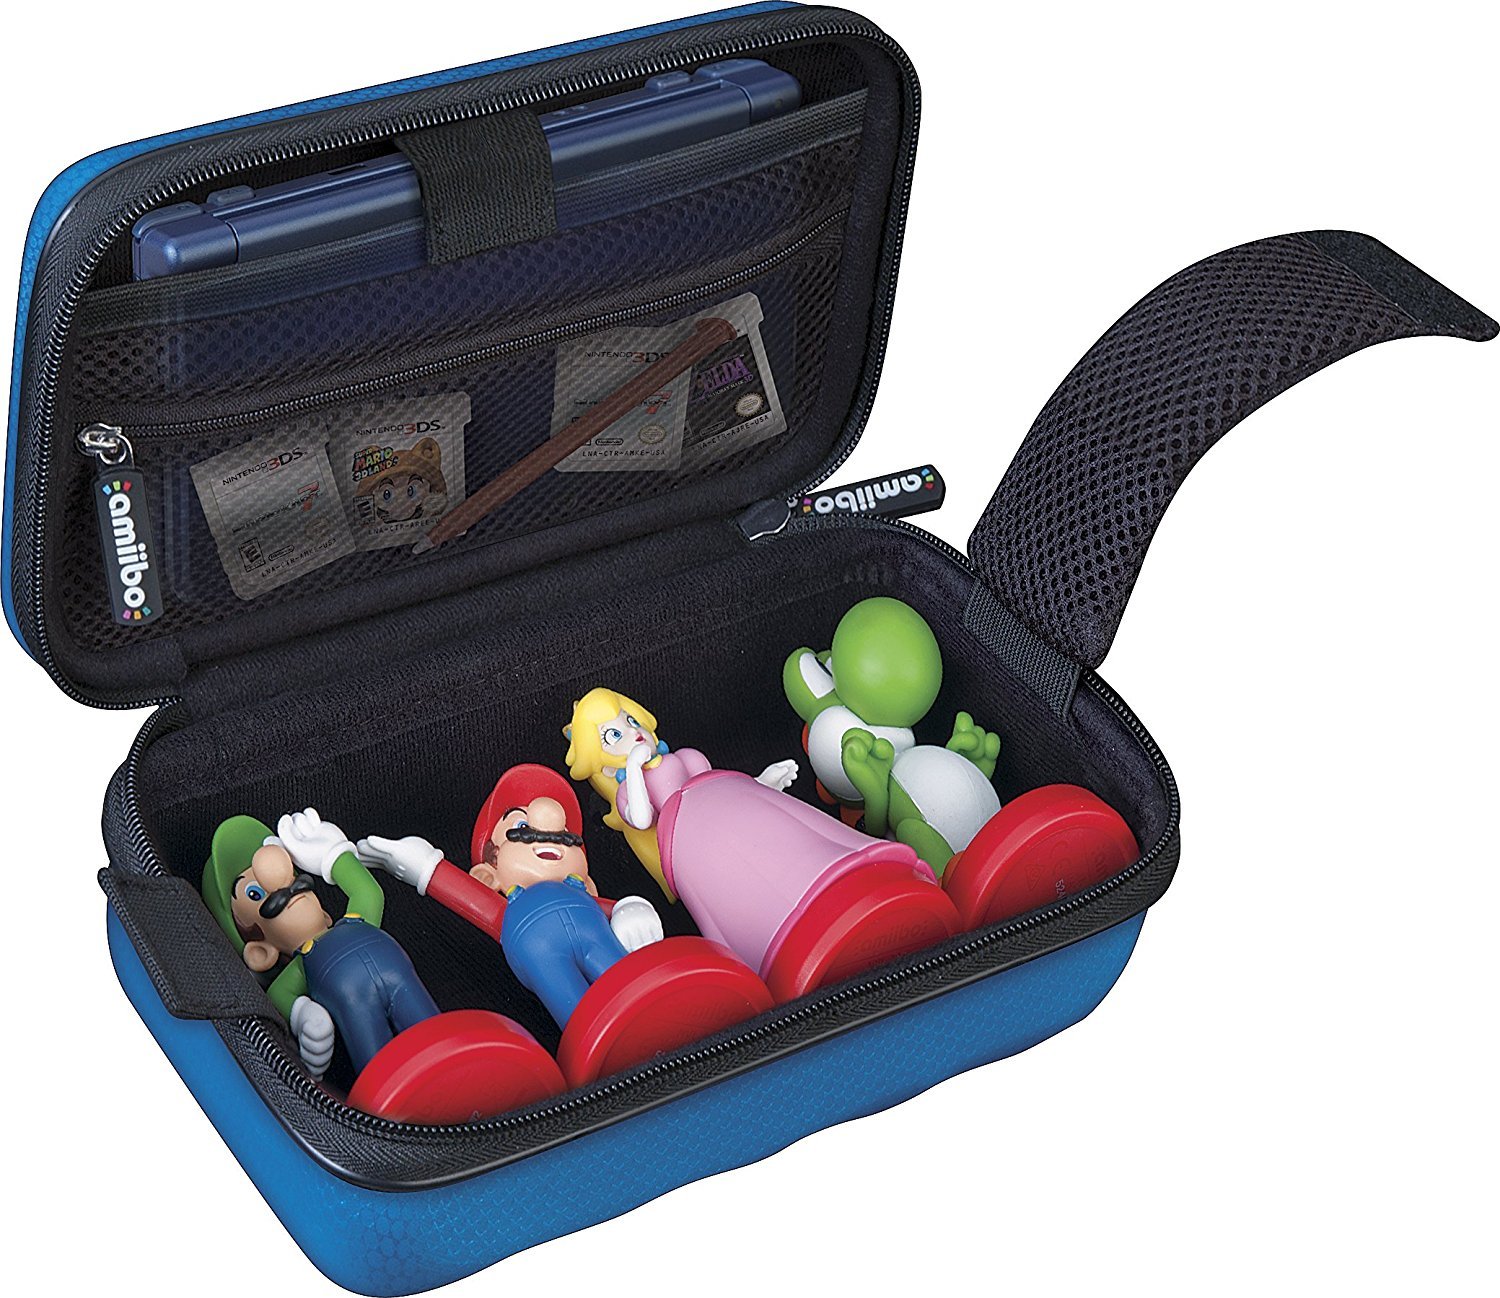 Officially Licensed Nintendo 3DS Amiibo Case – Protective Deluxe Traveler for Storage, Display or Carrying Case/Box – Blue